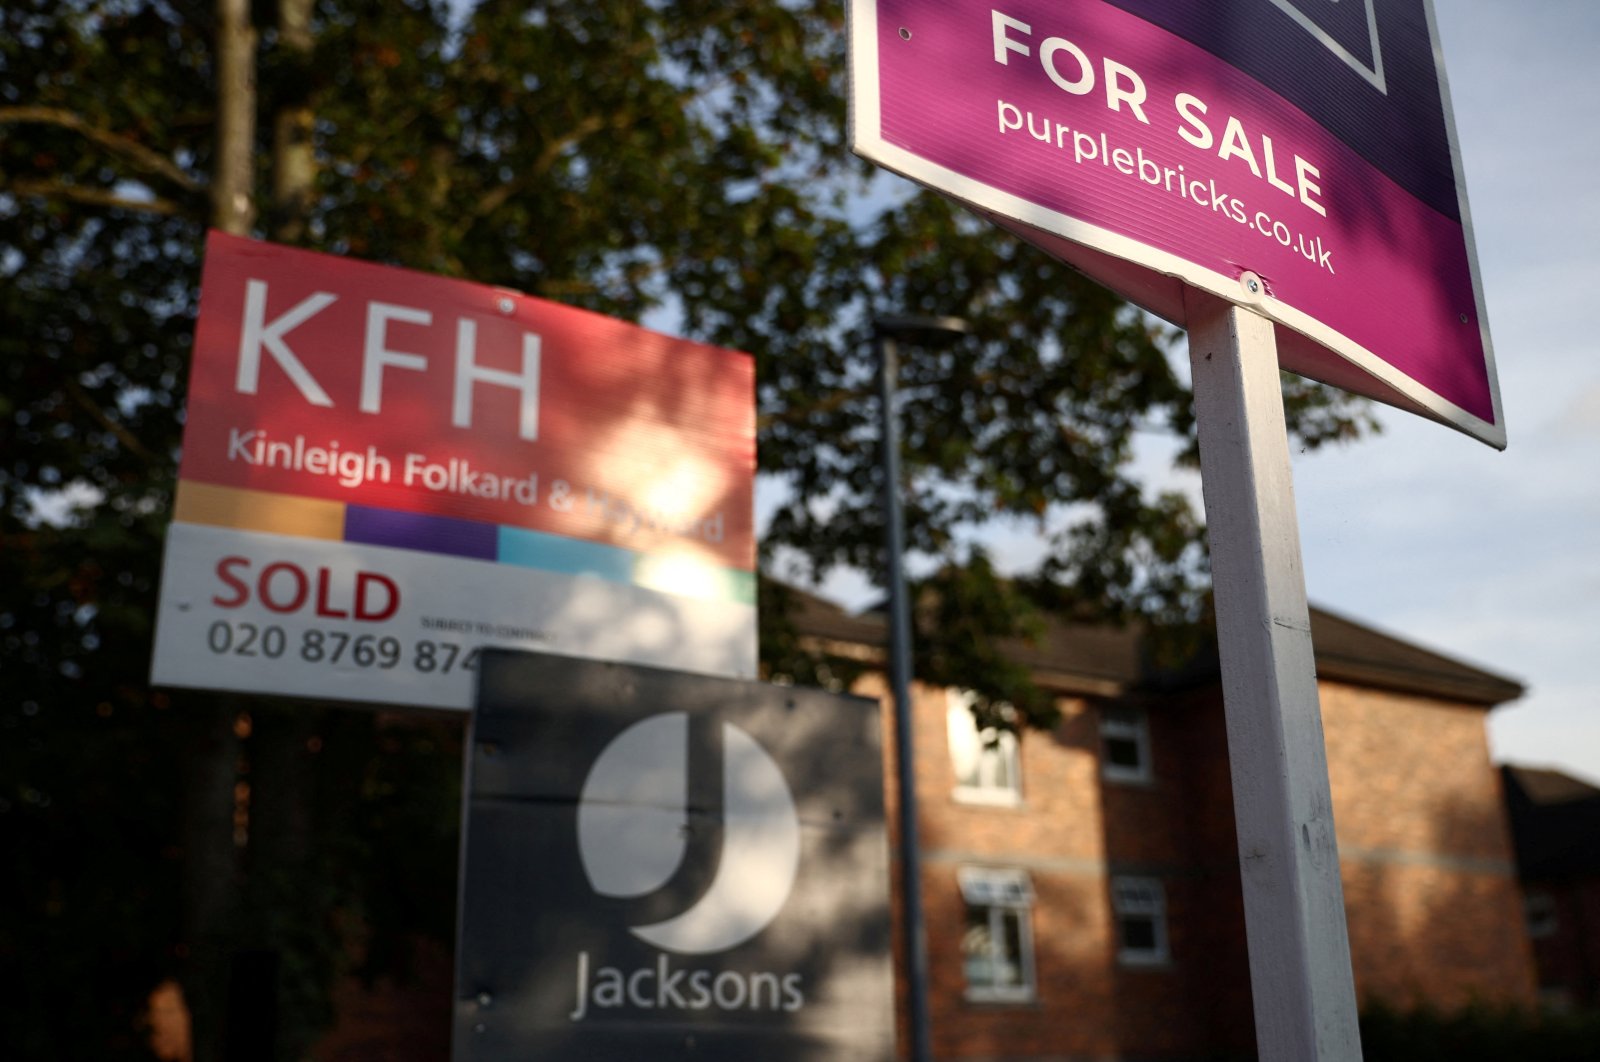 Real estate agent sales and letting signs are seen attached to railings outside an apartment building in south London, Britain, Sept. 23, 2021. (Reuters Photo)